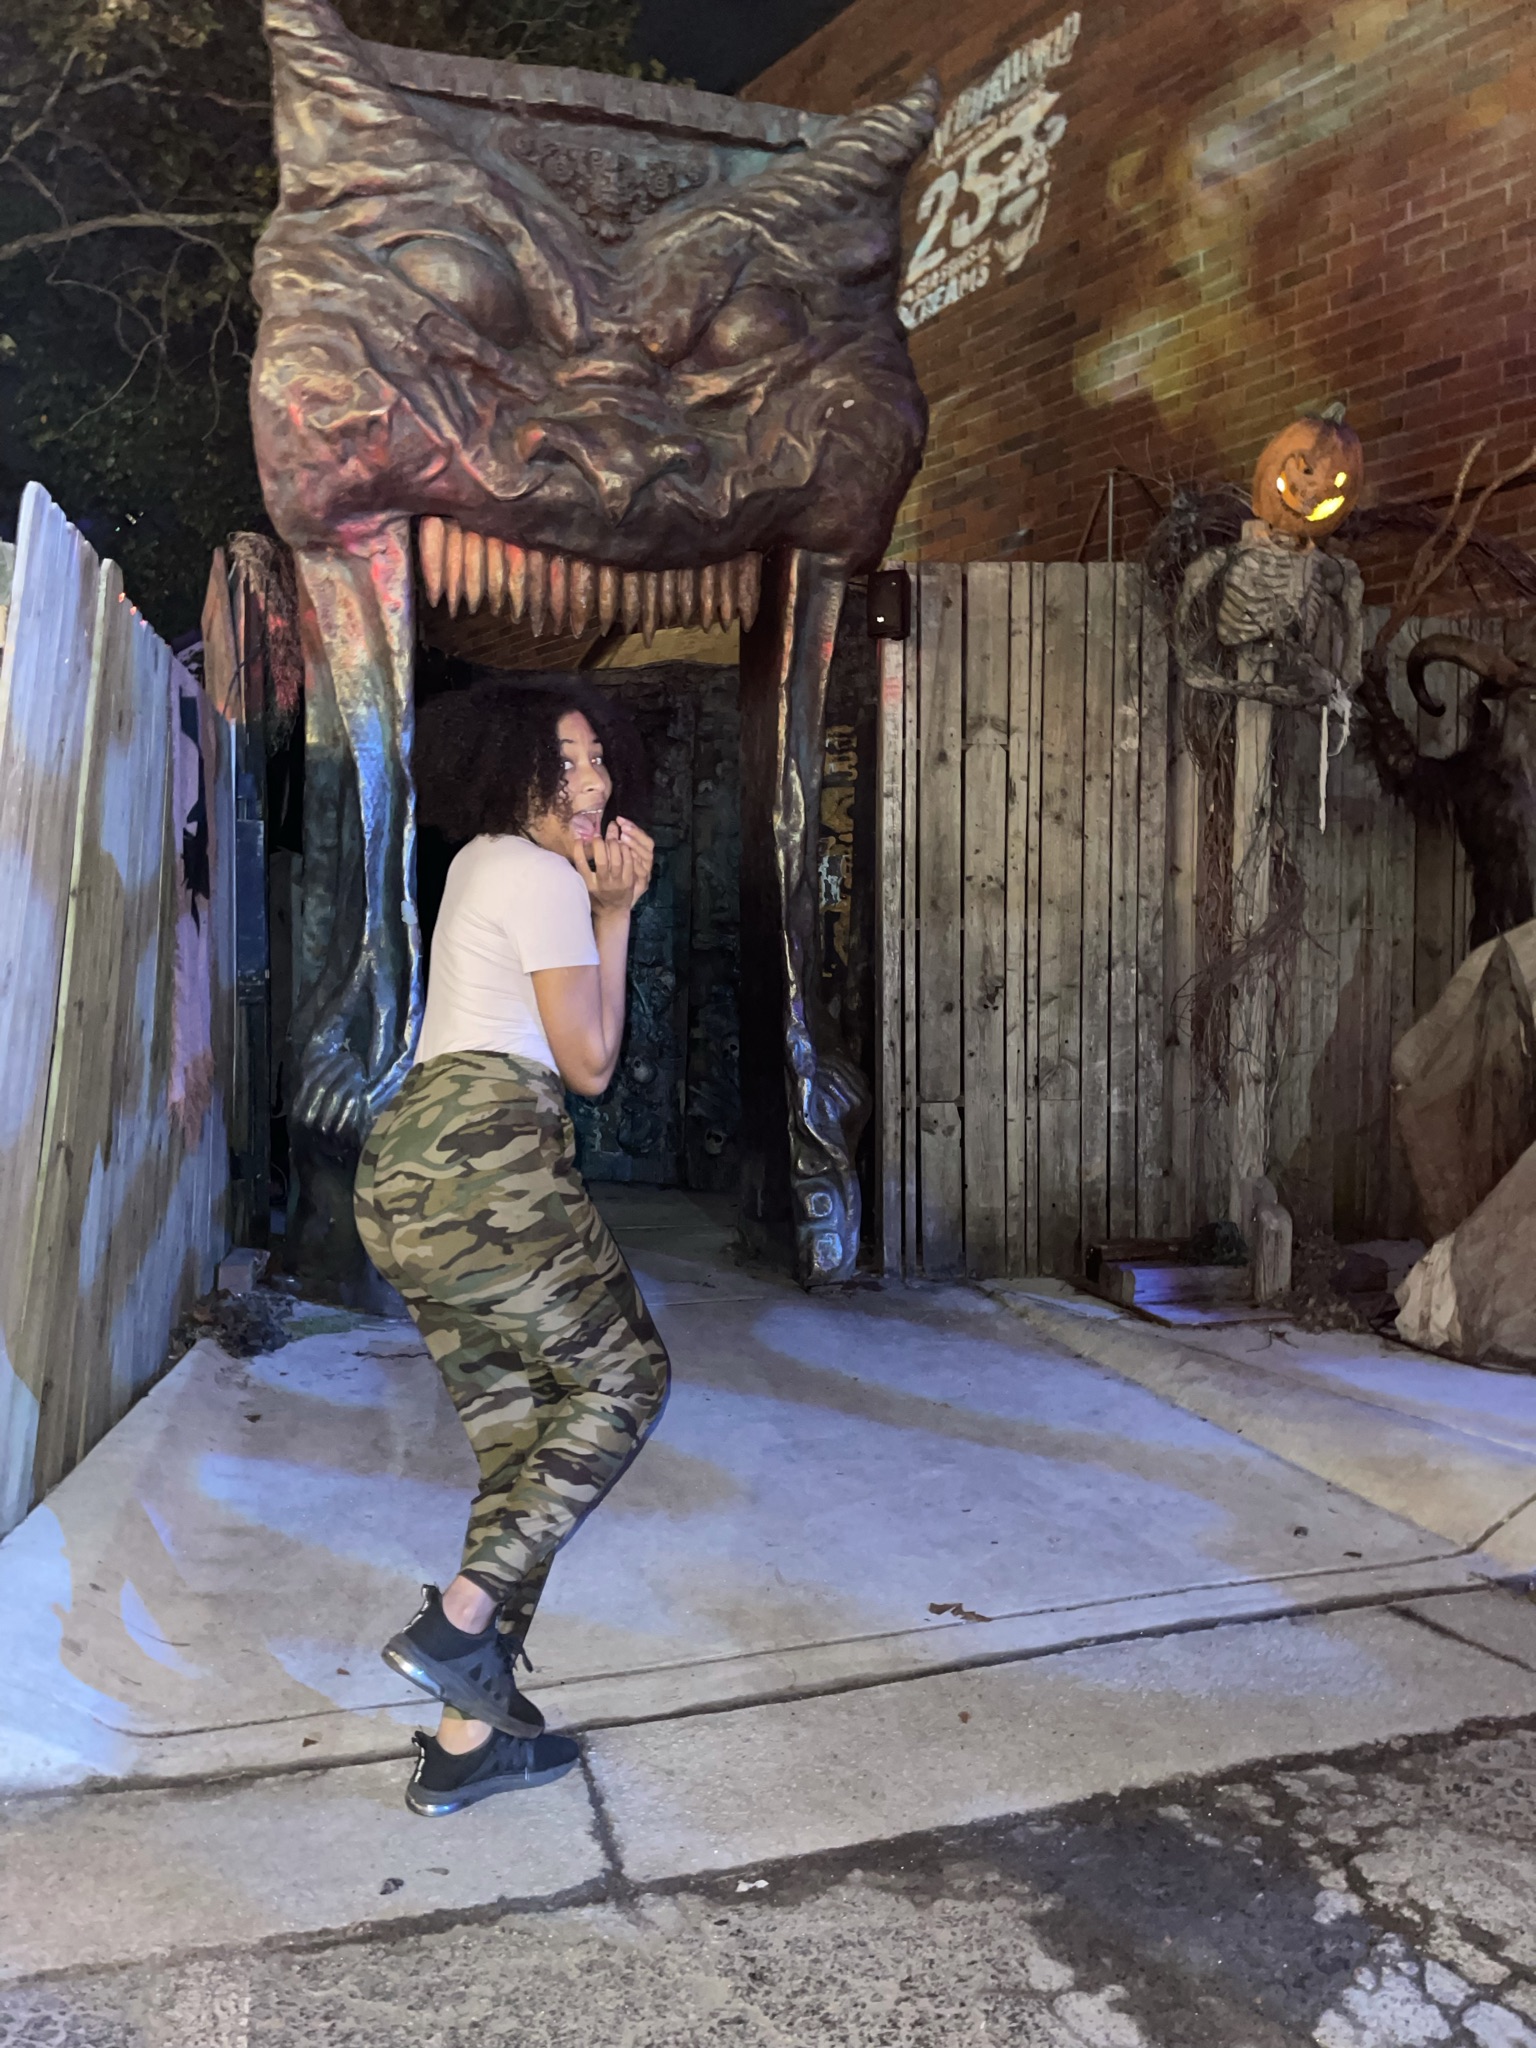 25 Years of Screams with Netherworld’s Haunted House